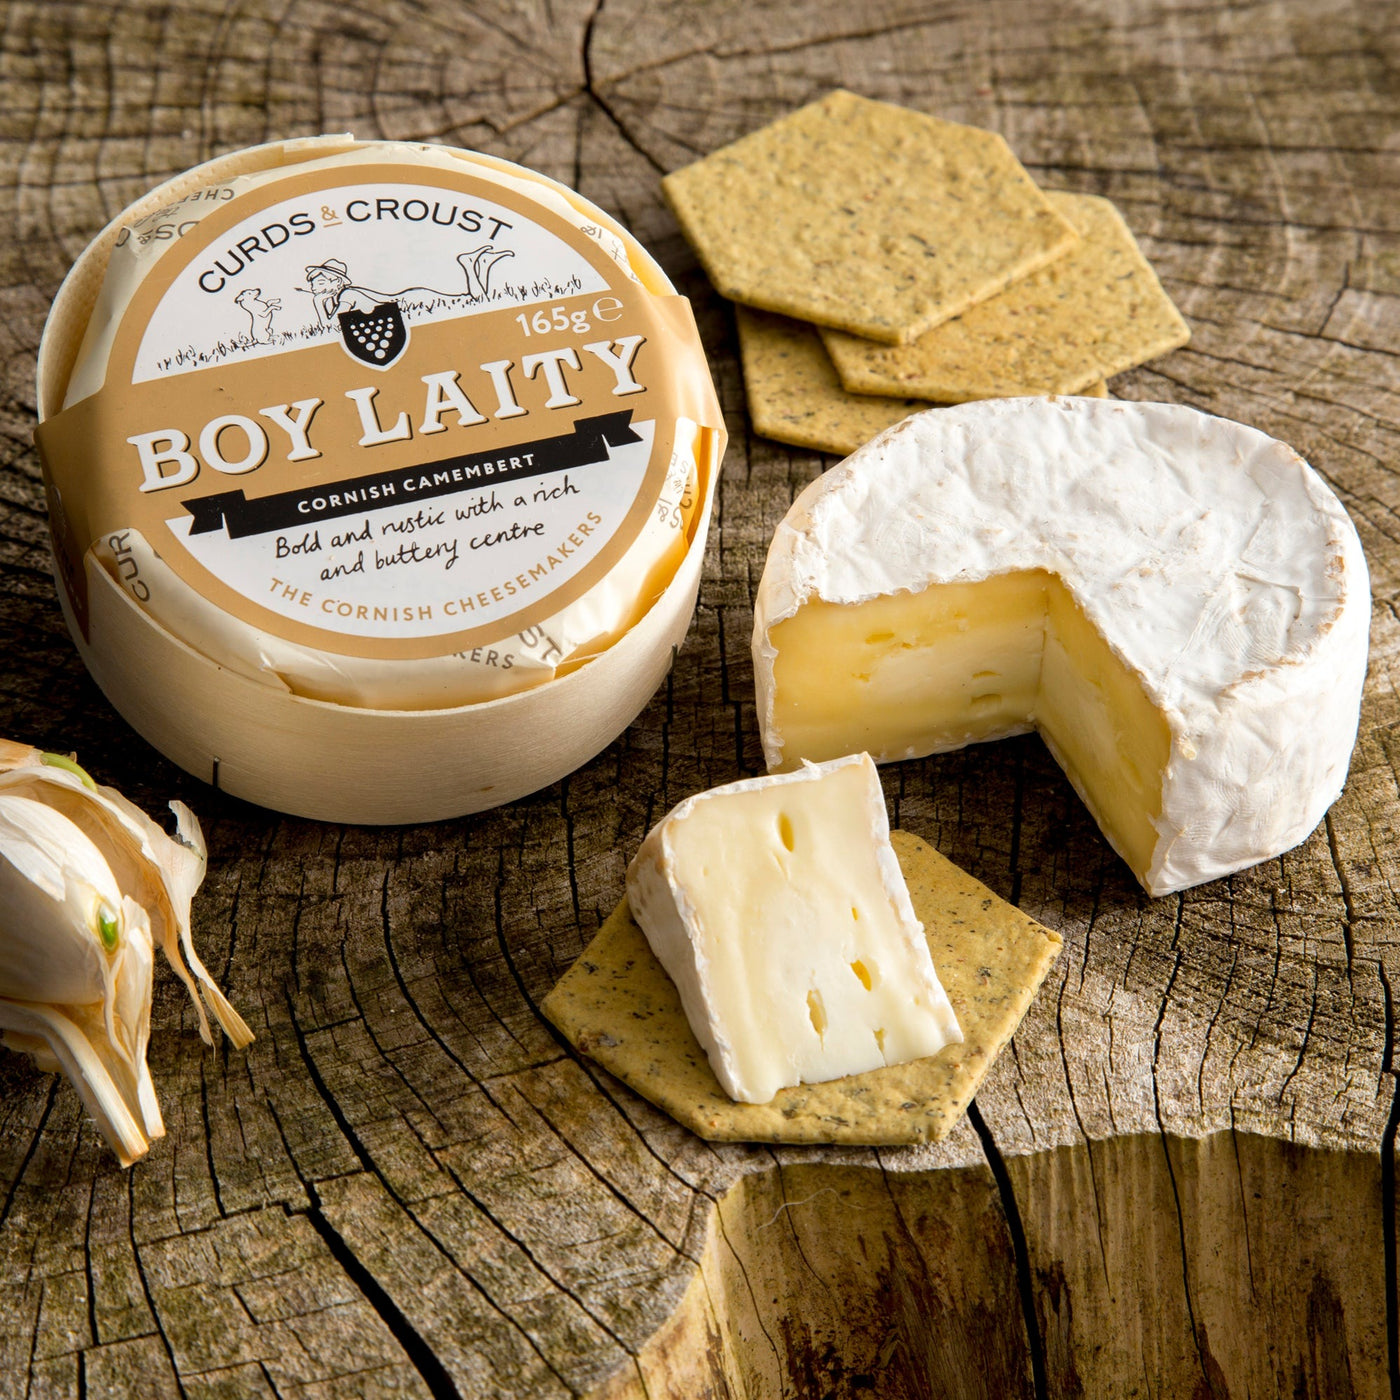 Boy Laity - Curds and Croust Cheese - The Cheese Market